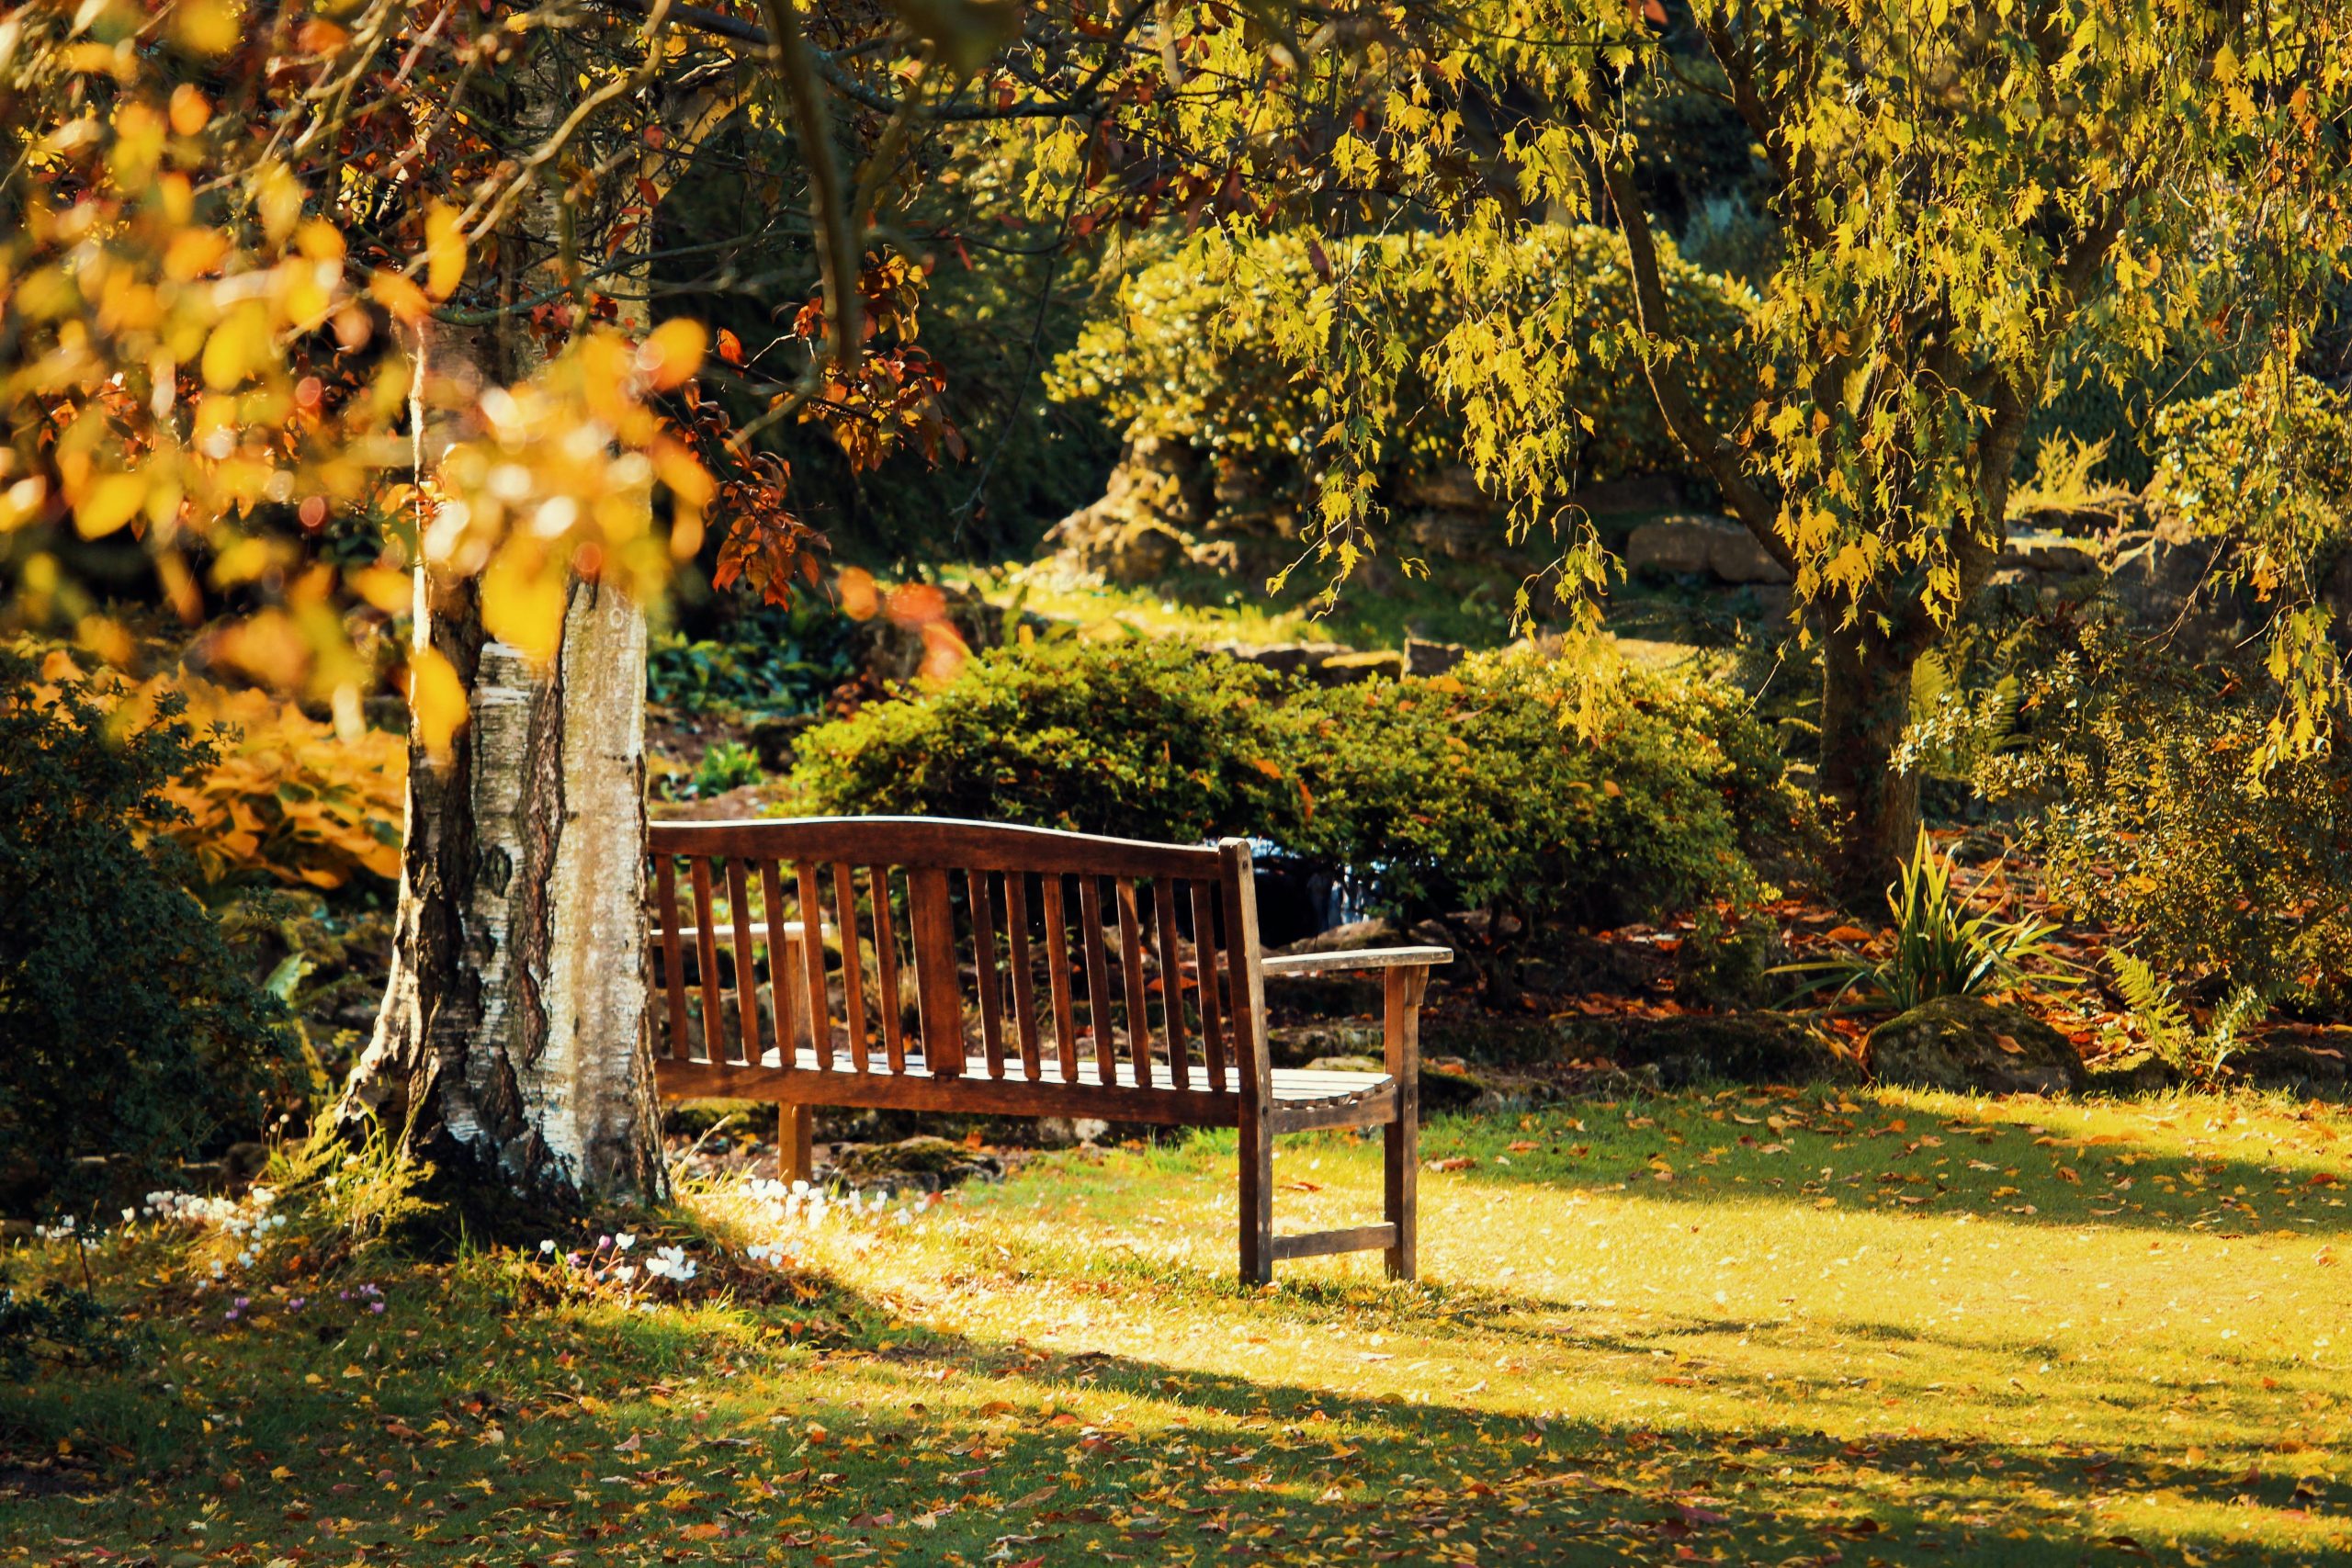 Garden bench in sunlight surrounded by trees in a public garden